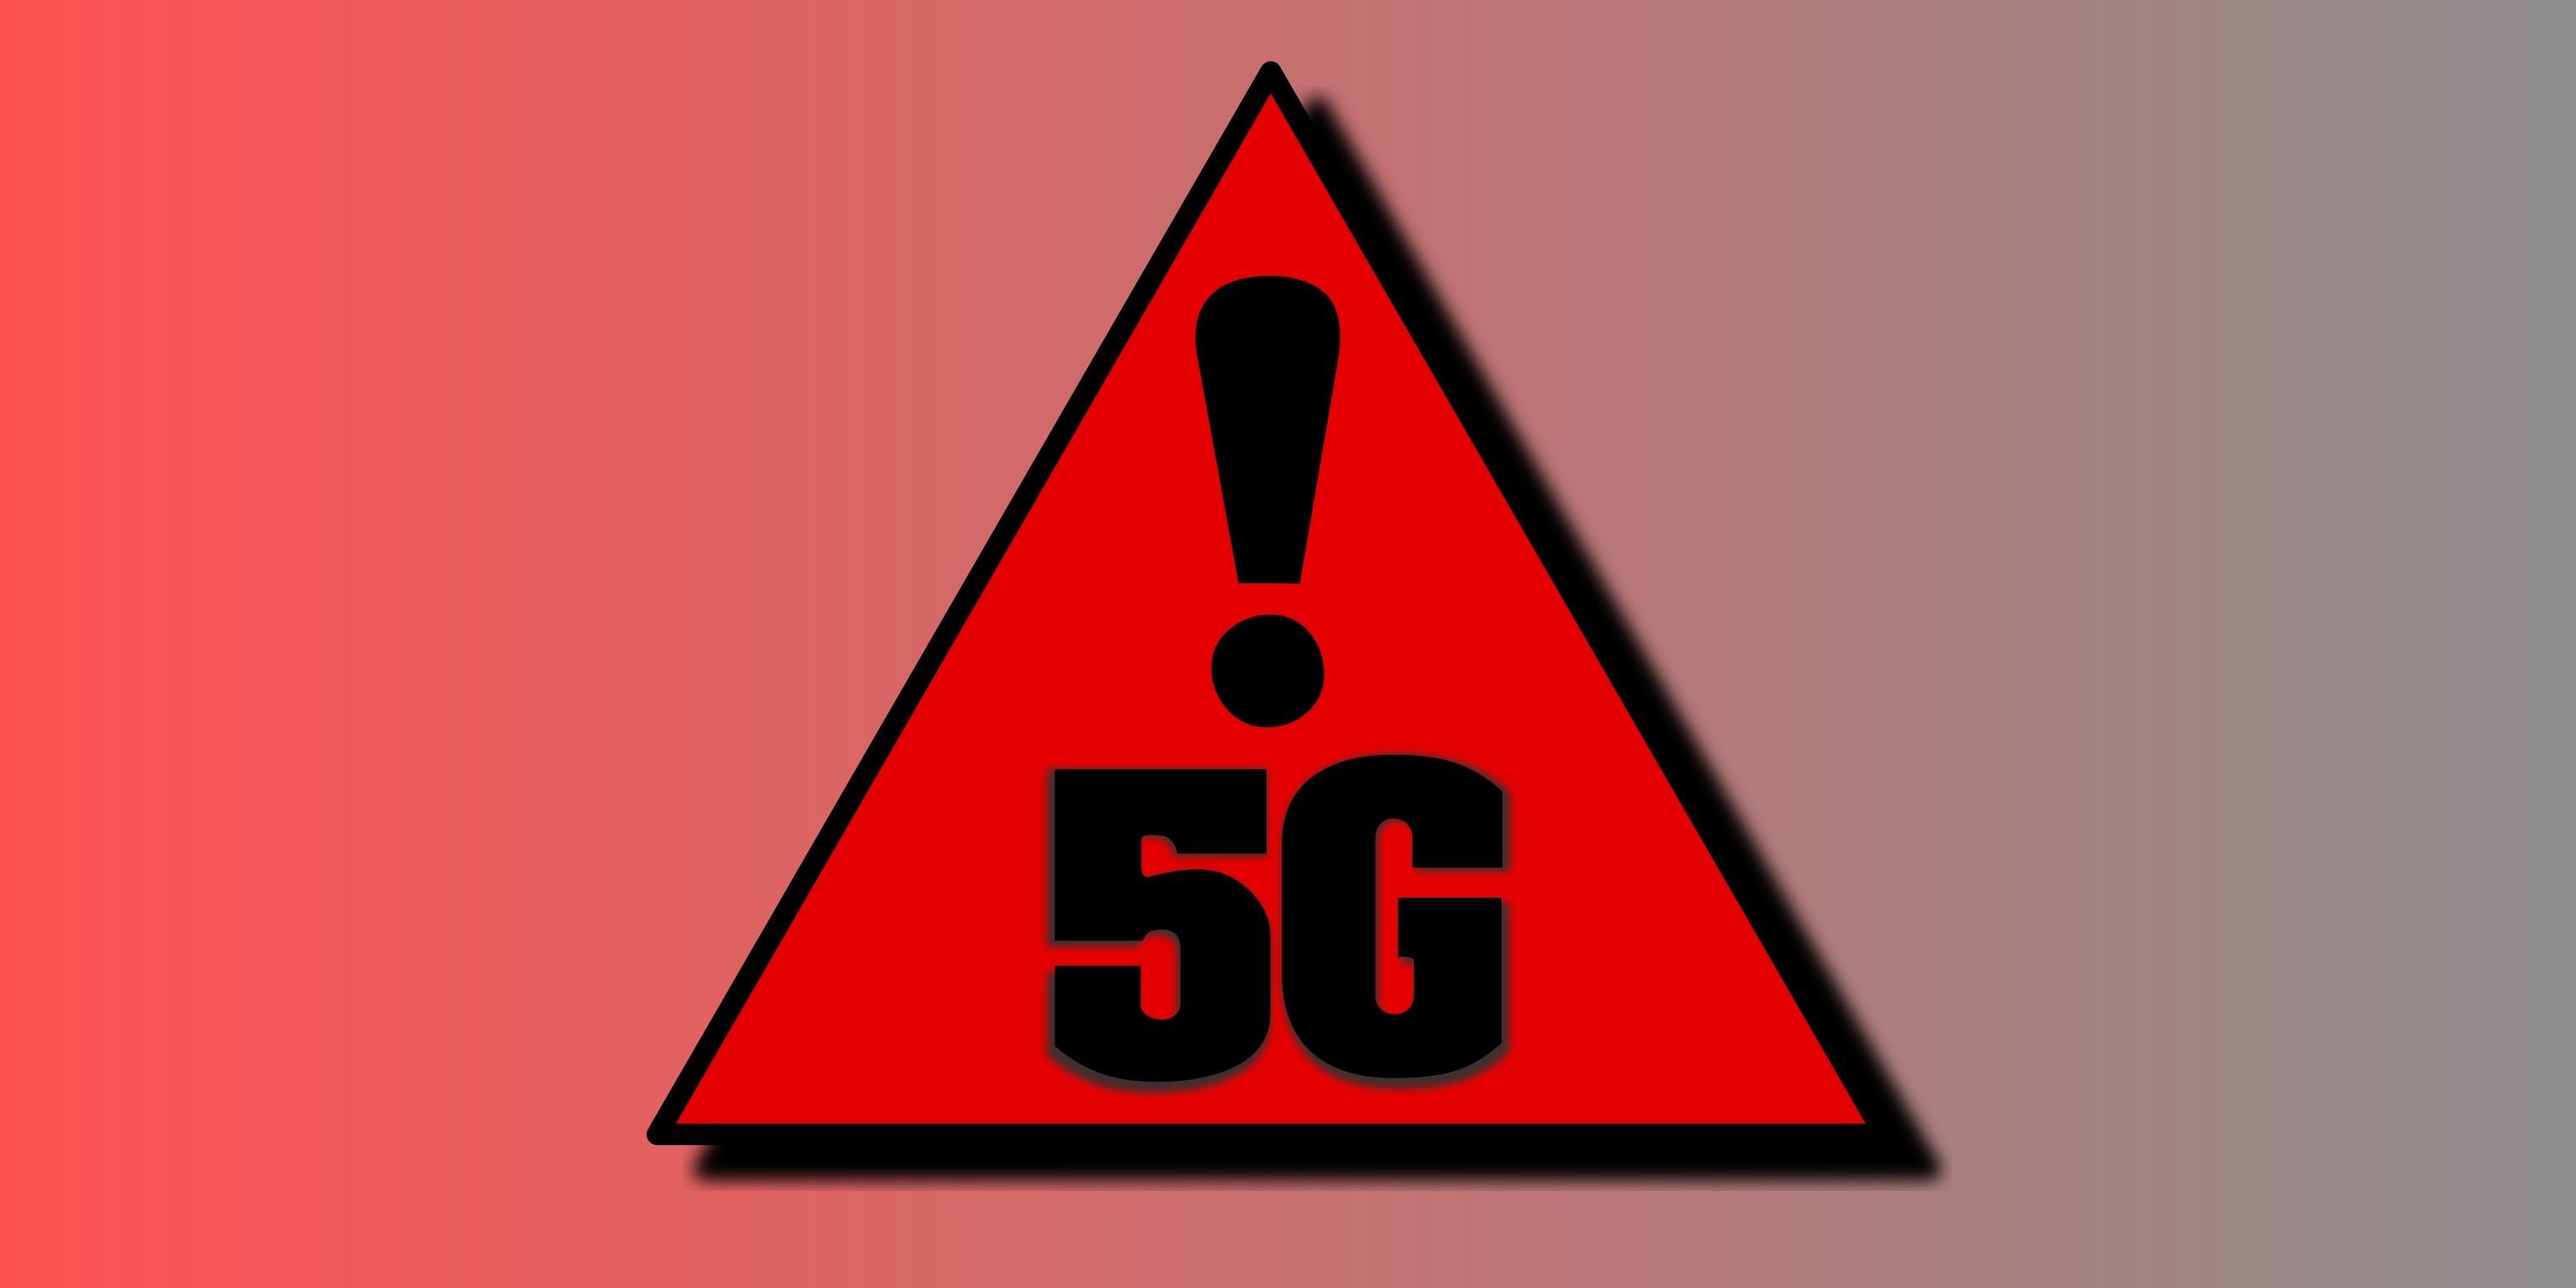 5G Caused Coronavirus Claims Leading to Attacks on Cellphone Towers